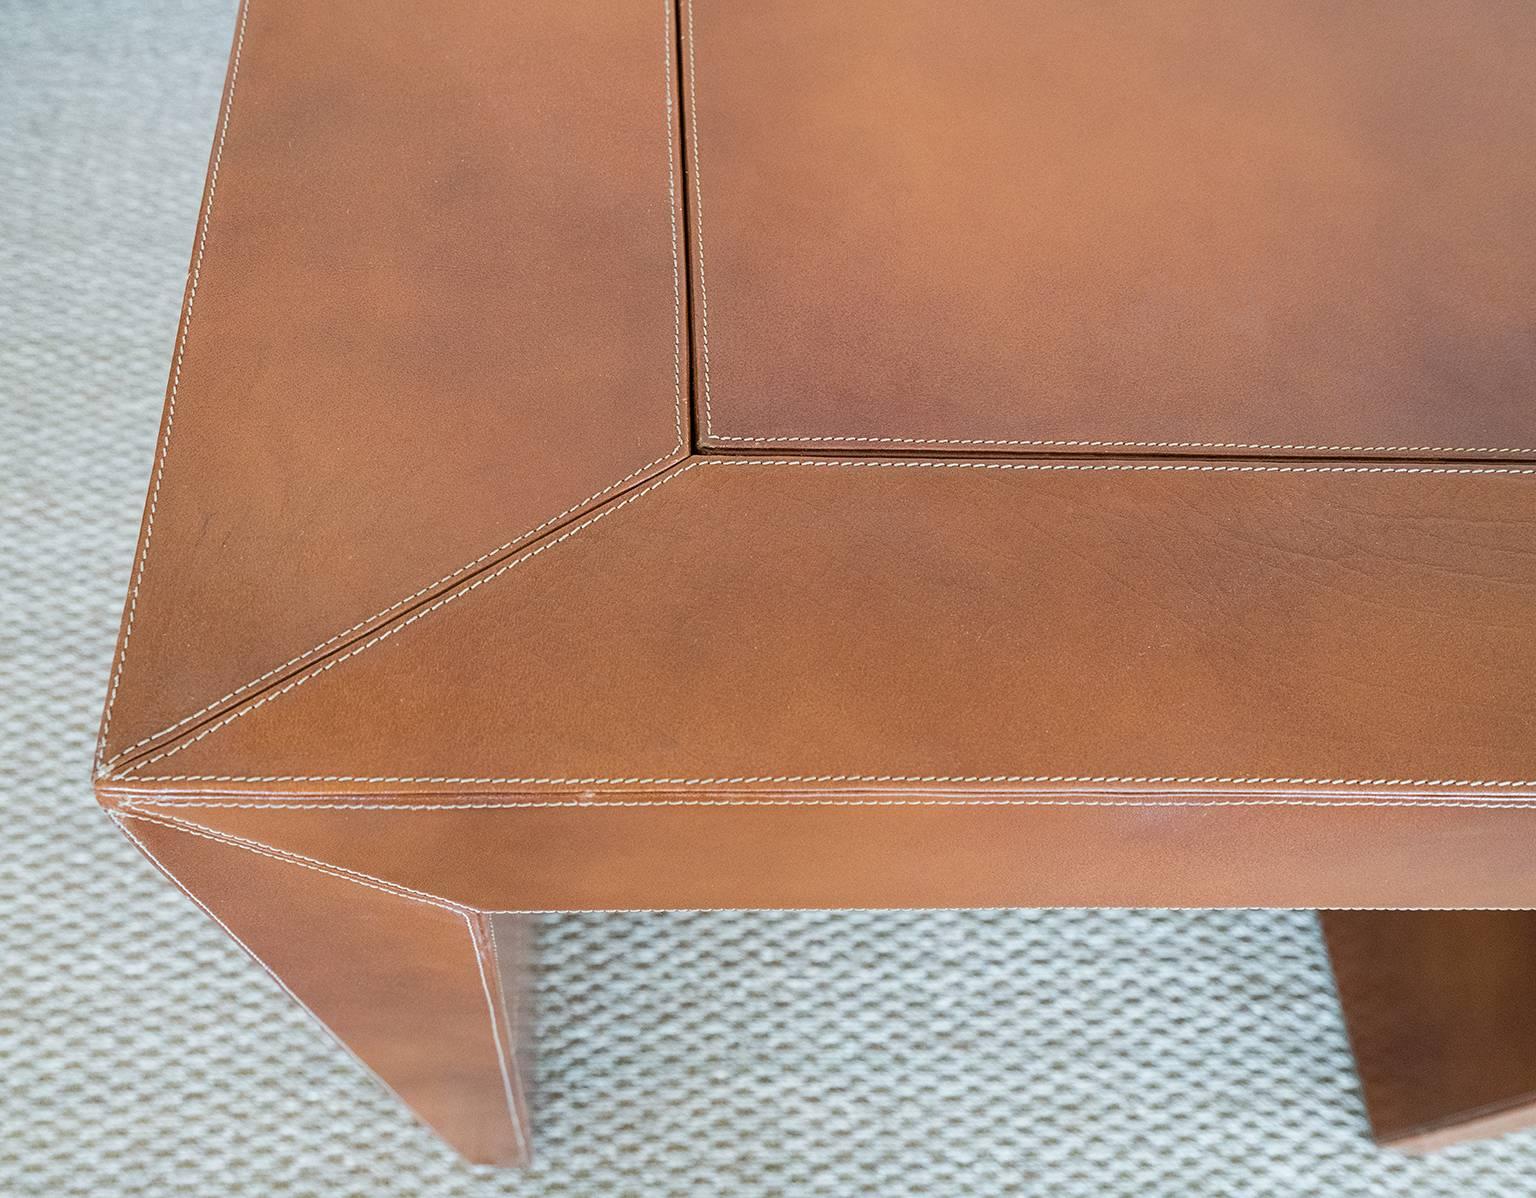 Chess/Backgammon/Checkers Game Table, 1970s Stitched Leather In Good Condition For Sale In Los Angeles, CA